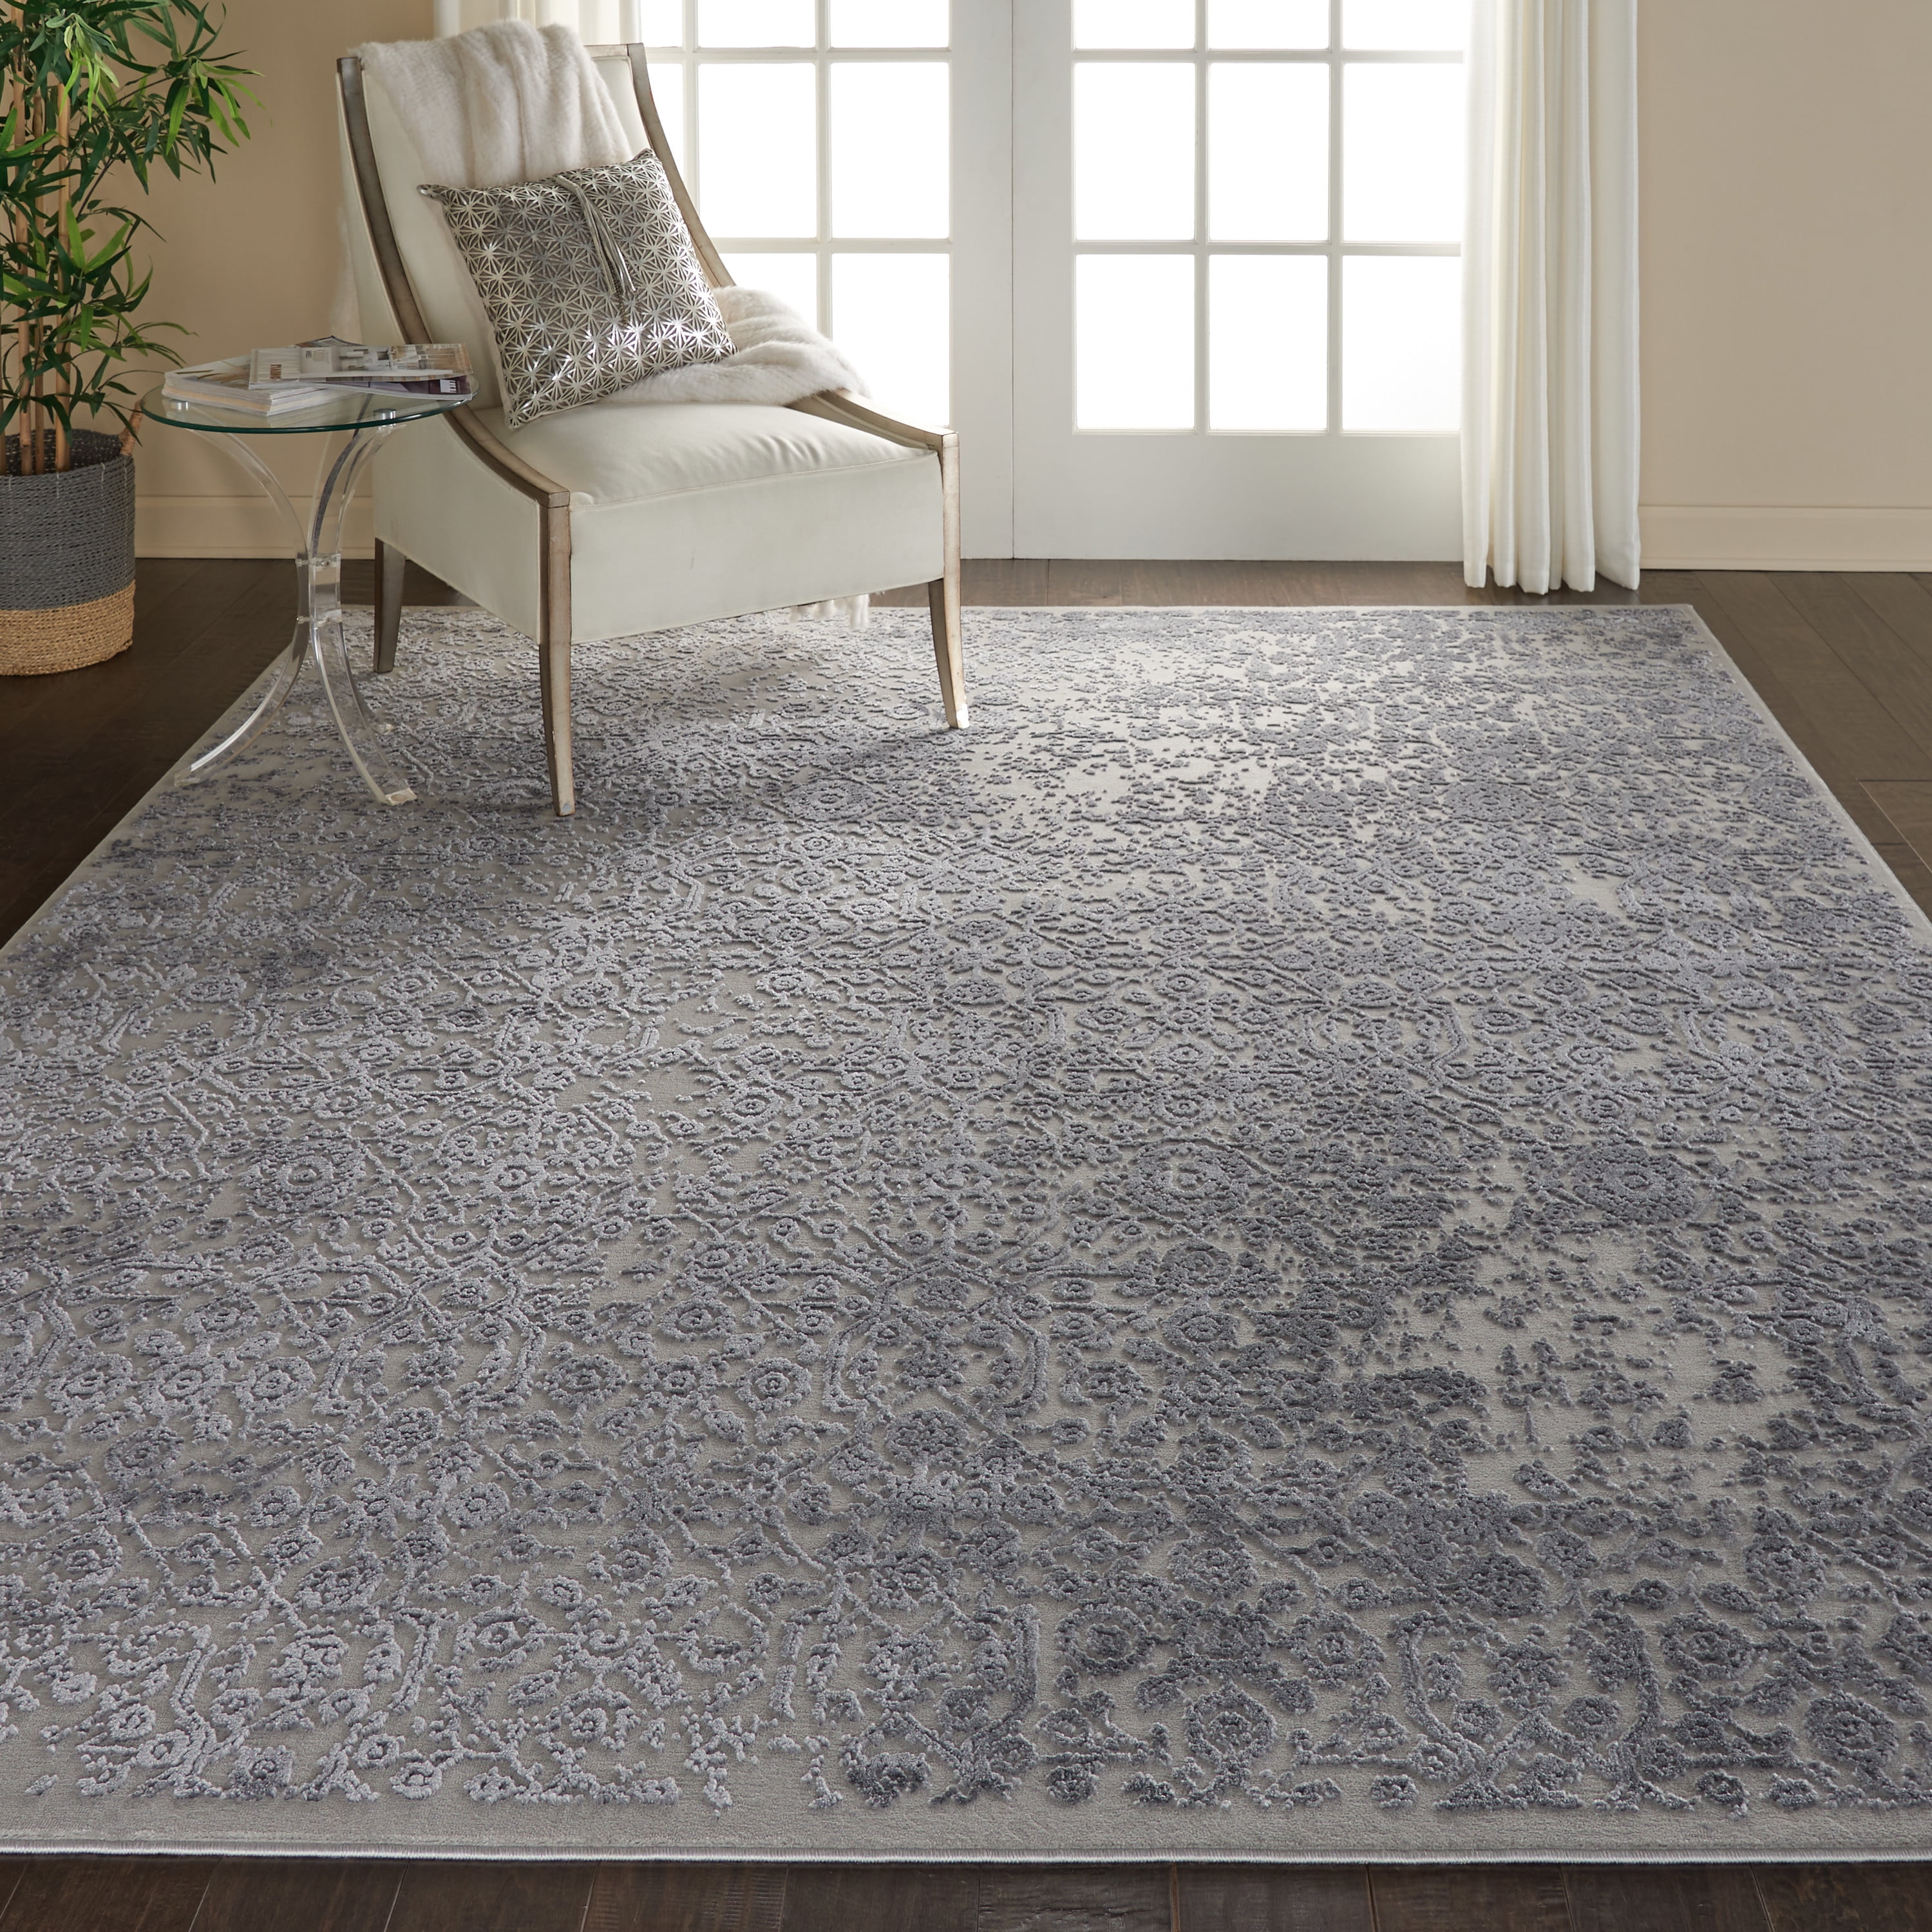 Slate Blue And Grey French Country, Slate Blue Area Rug